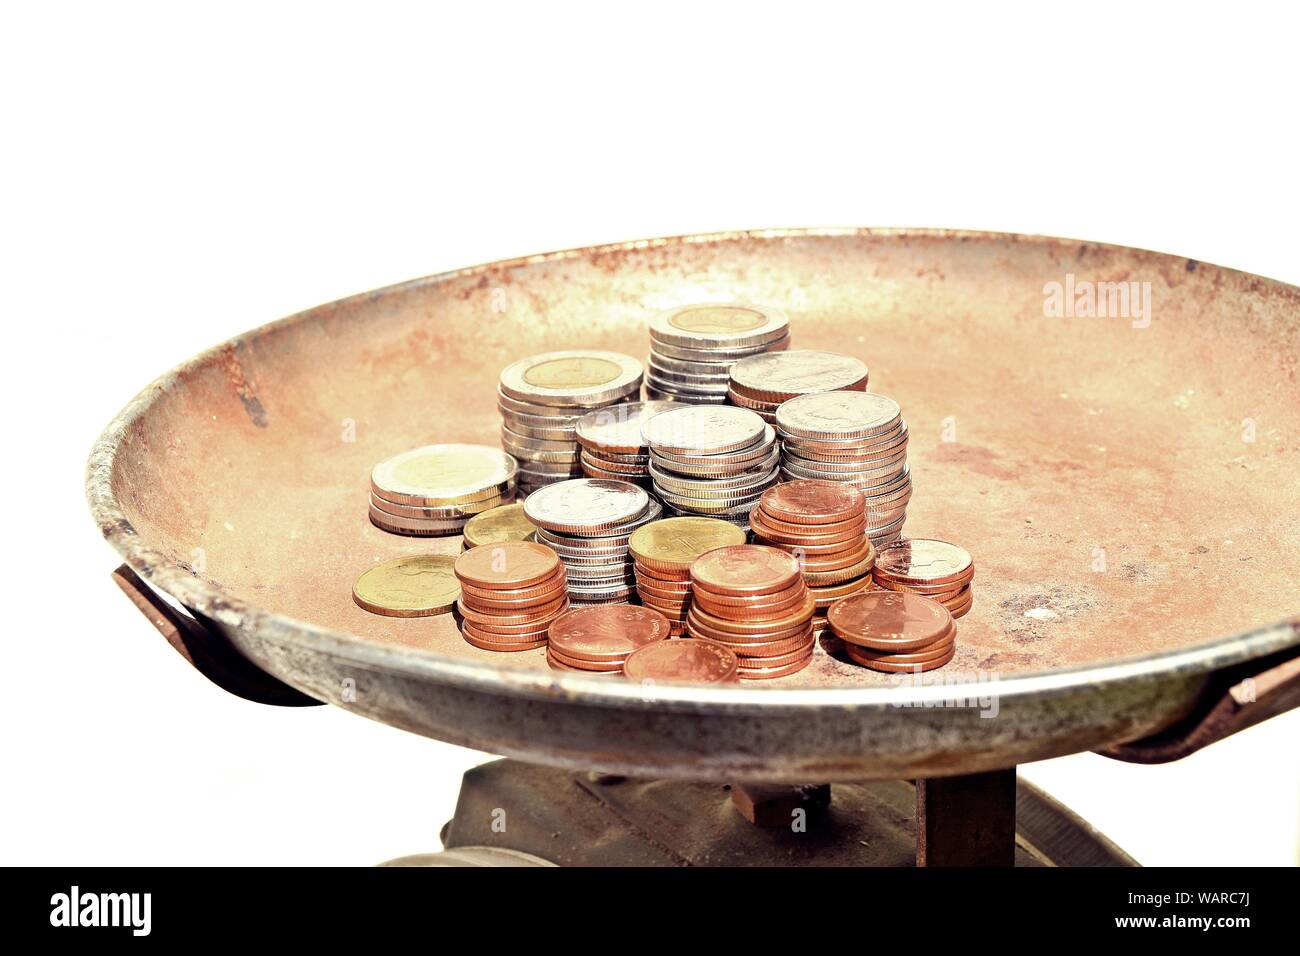 Many stacks of coins in various sizes and valued on vintage kitchen scales on white background, Financial and commit business concept Stock Photo